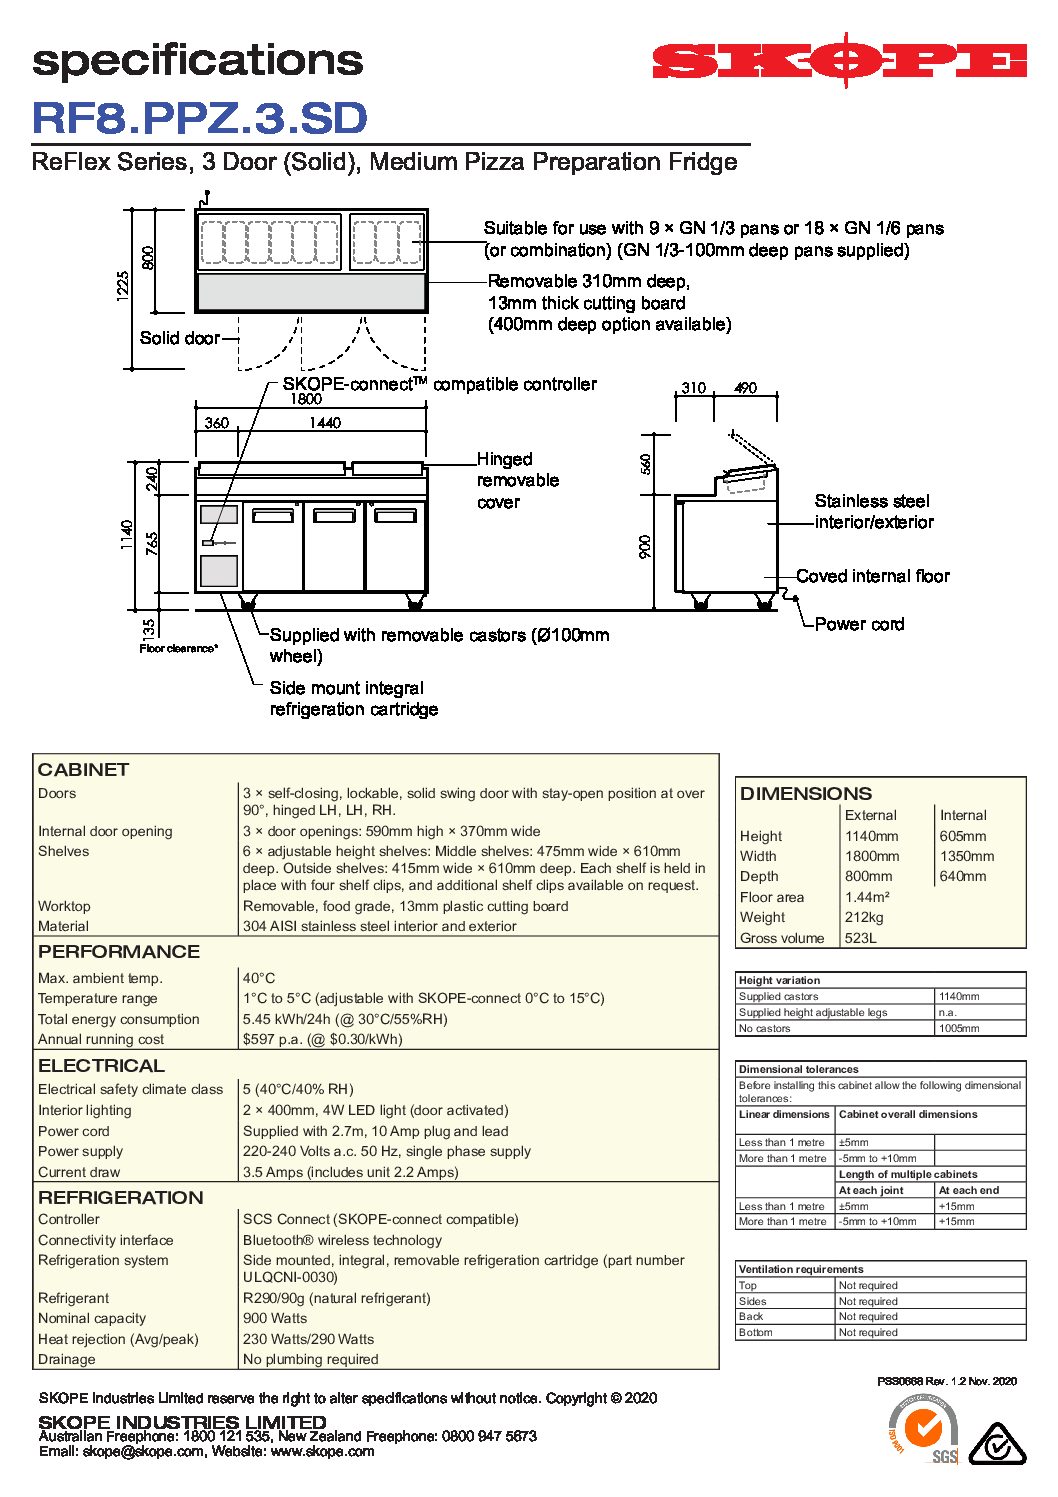 cover page of the ReFlex 3 Solid Door GN Compatible Pizza Preparation Fridge specification sheet pdf